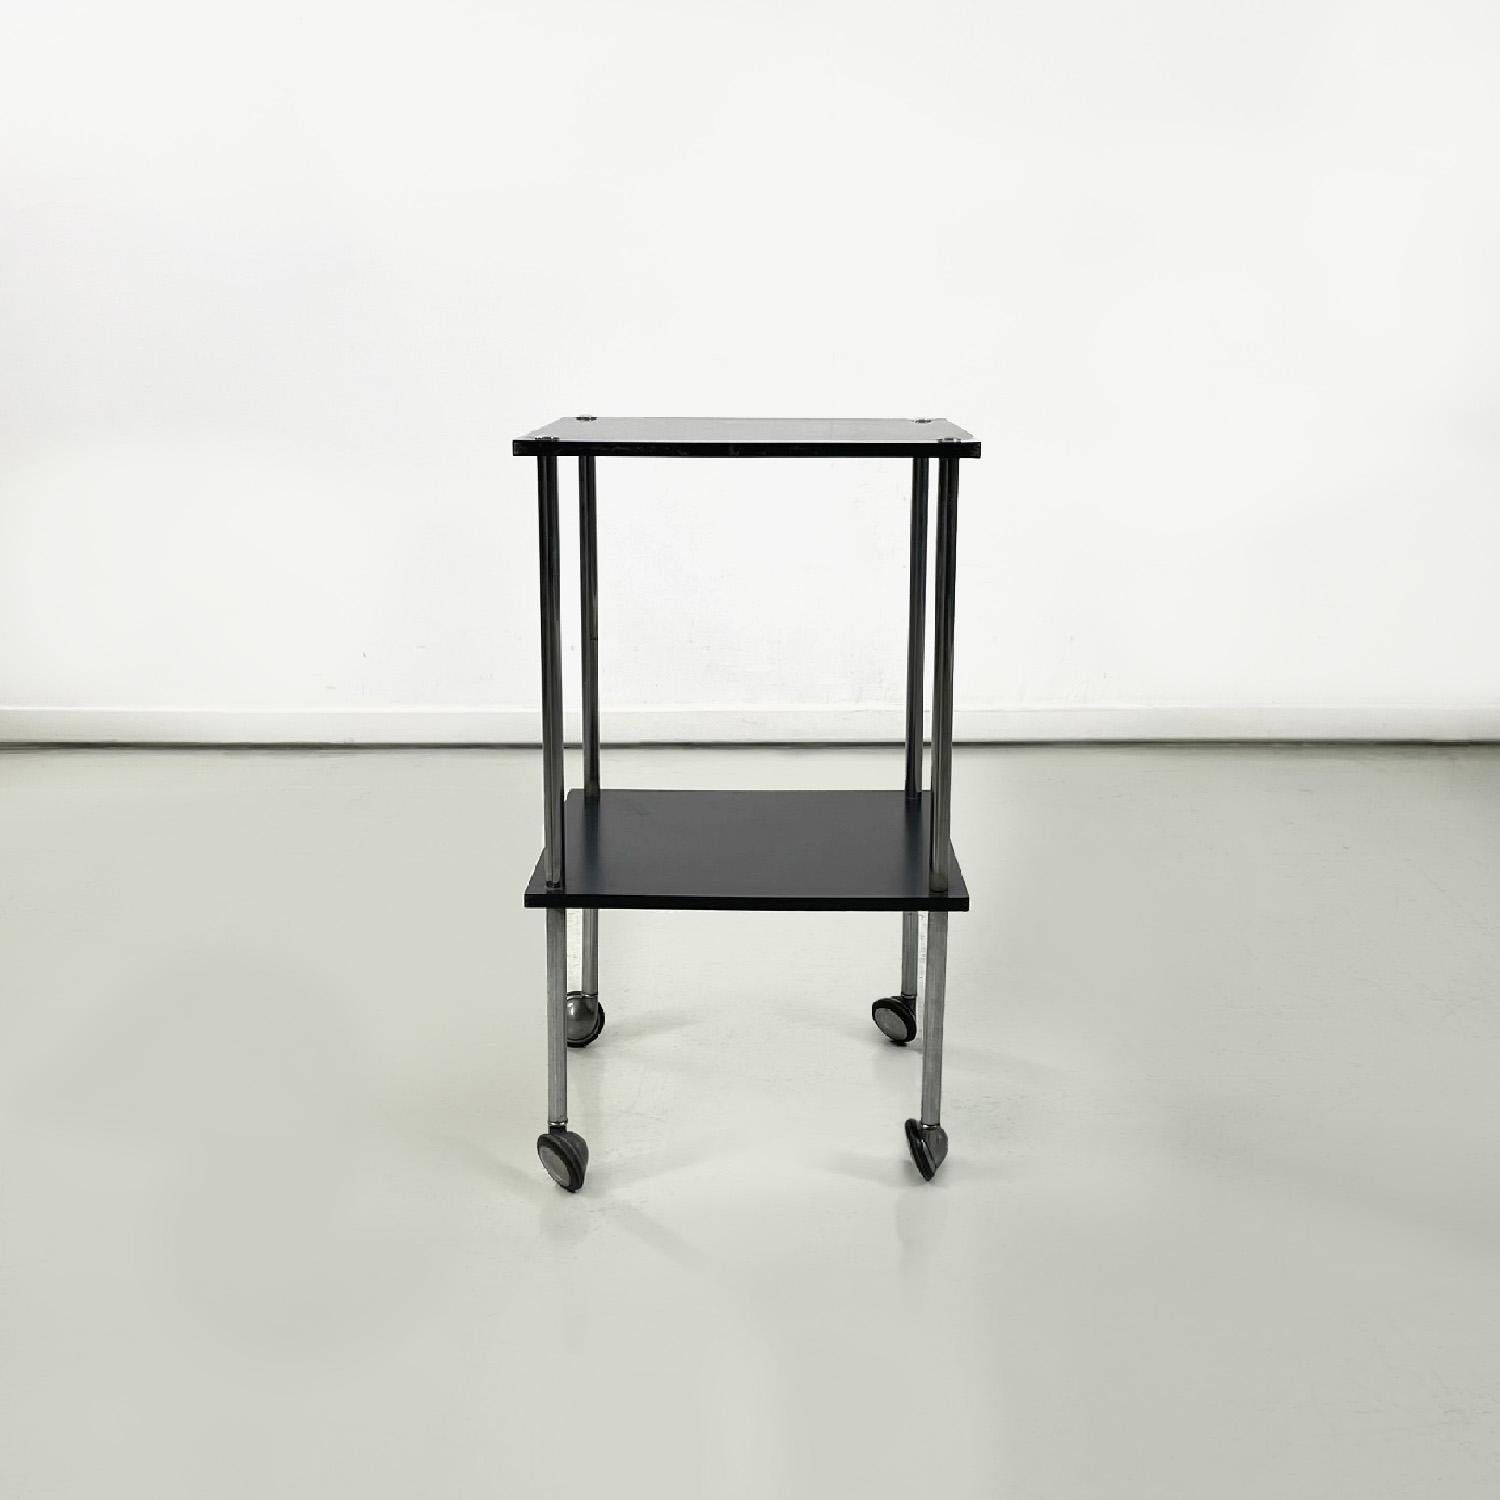 Italian black trolley on wheels T9 by Luigi Caccia Dominioni for Azucena, 1960s
Trolley or coffee table mod.T9 on wheels. It has two black lacquered rectangular tops, the structure is in chromed steel. The legs have a circular section, the wheels